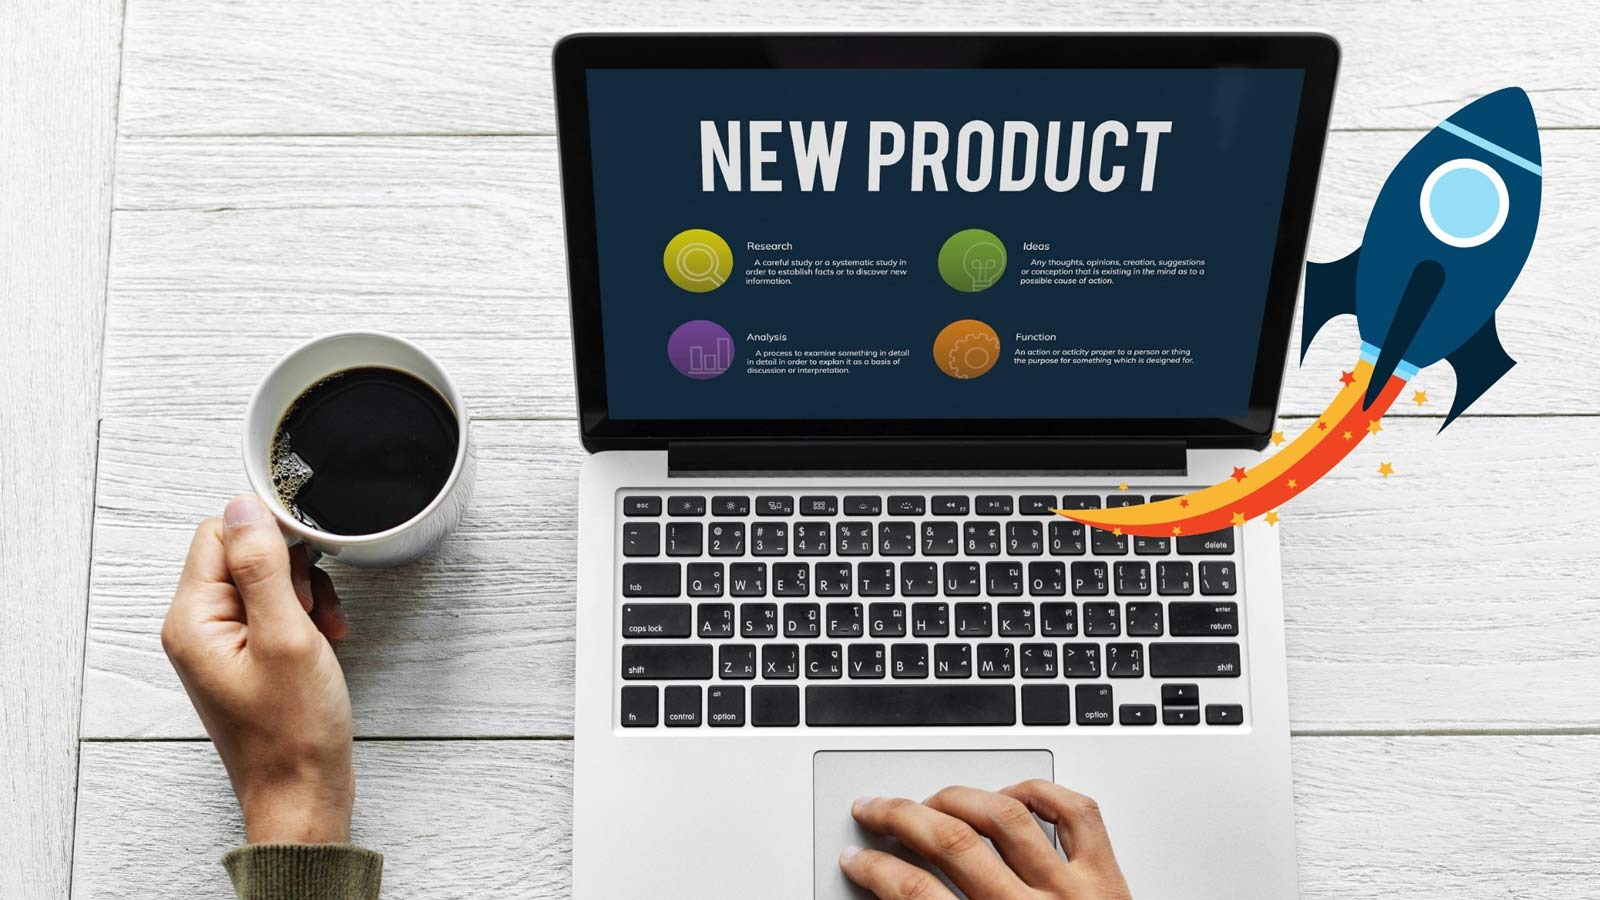 Product launch checklist